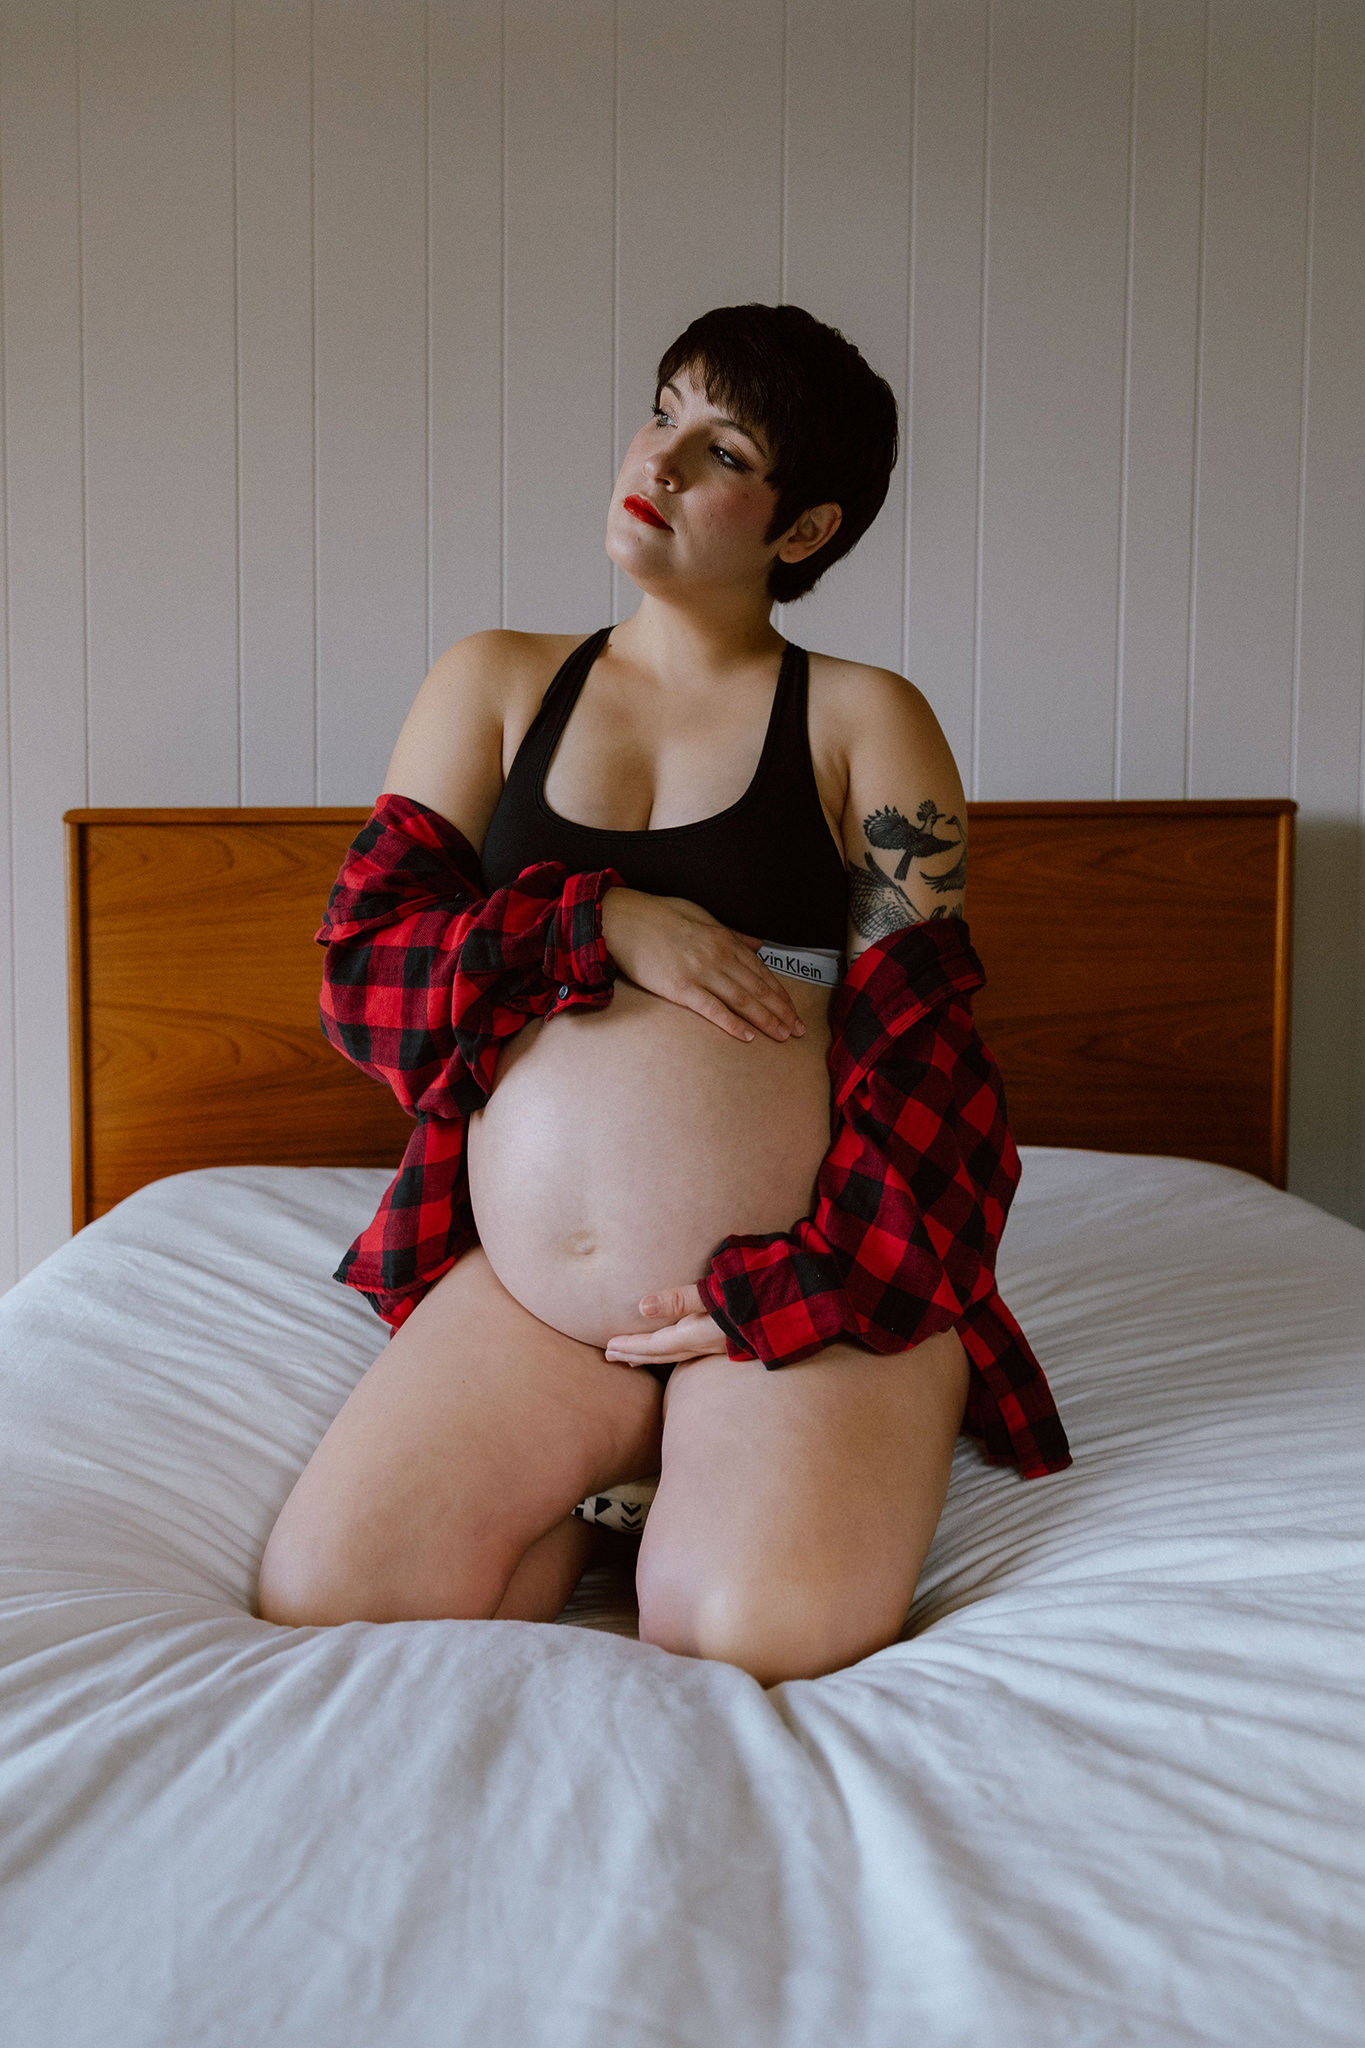 A moody boudoir maternity photo on a bed with natural light